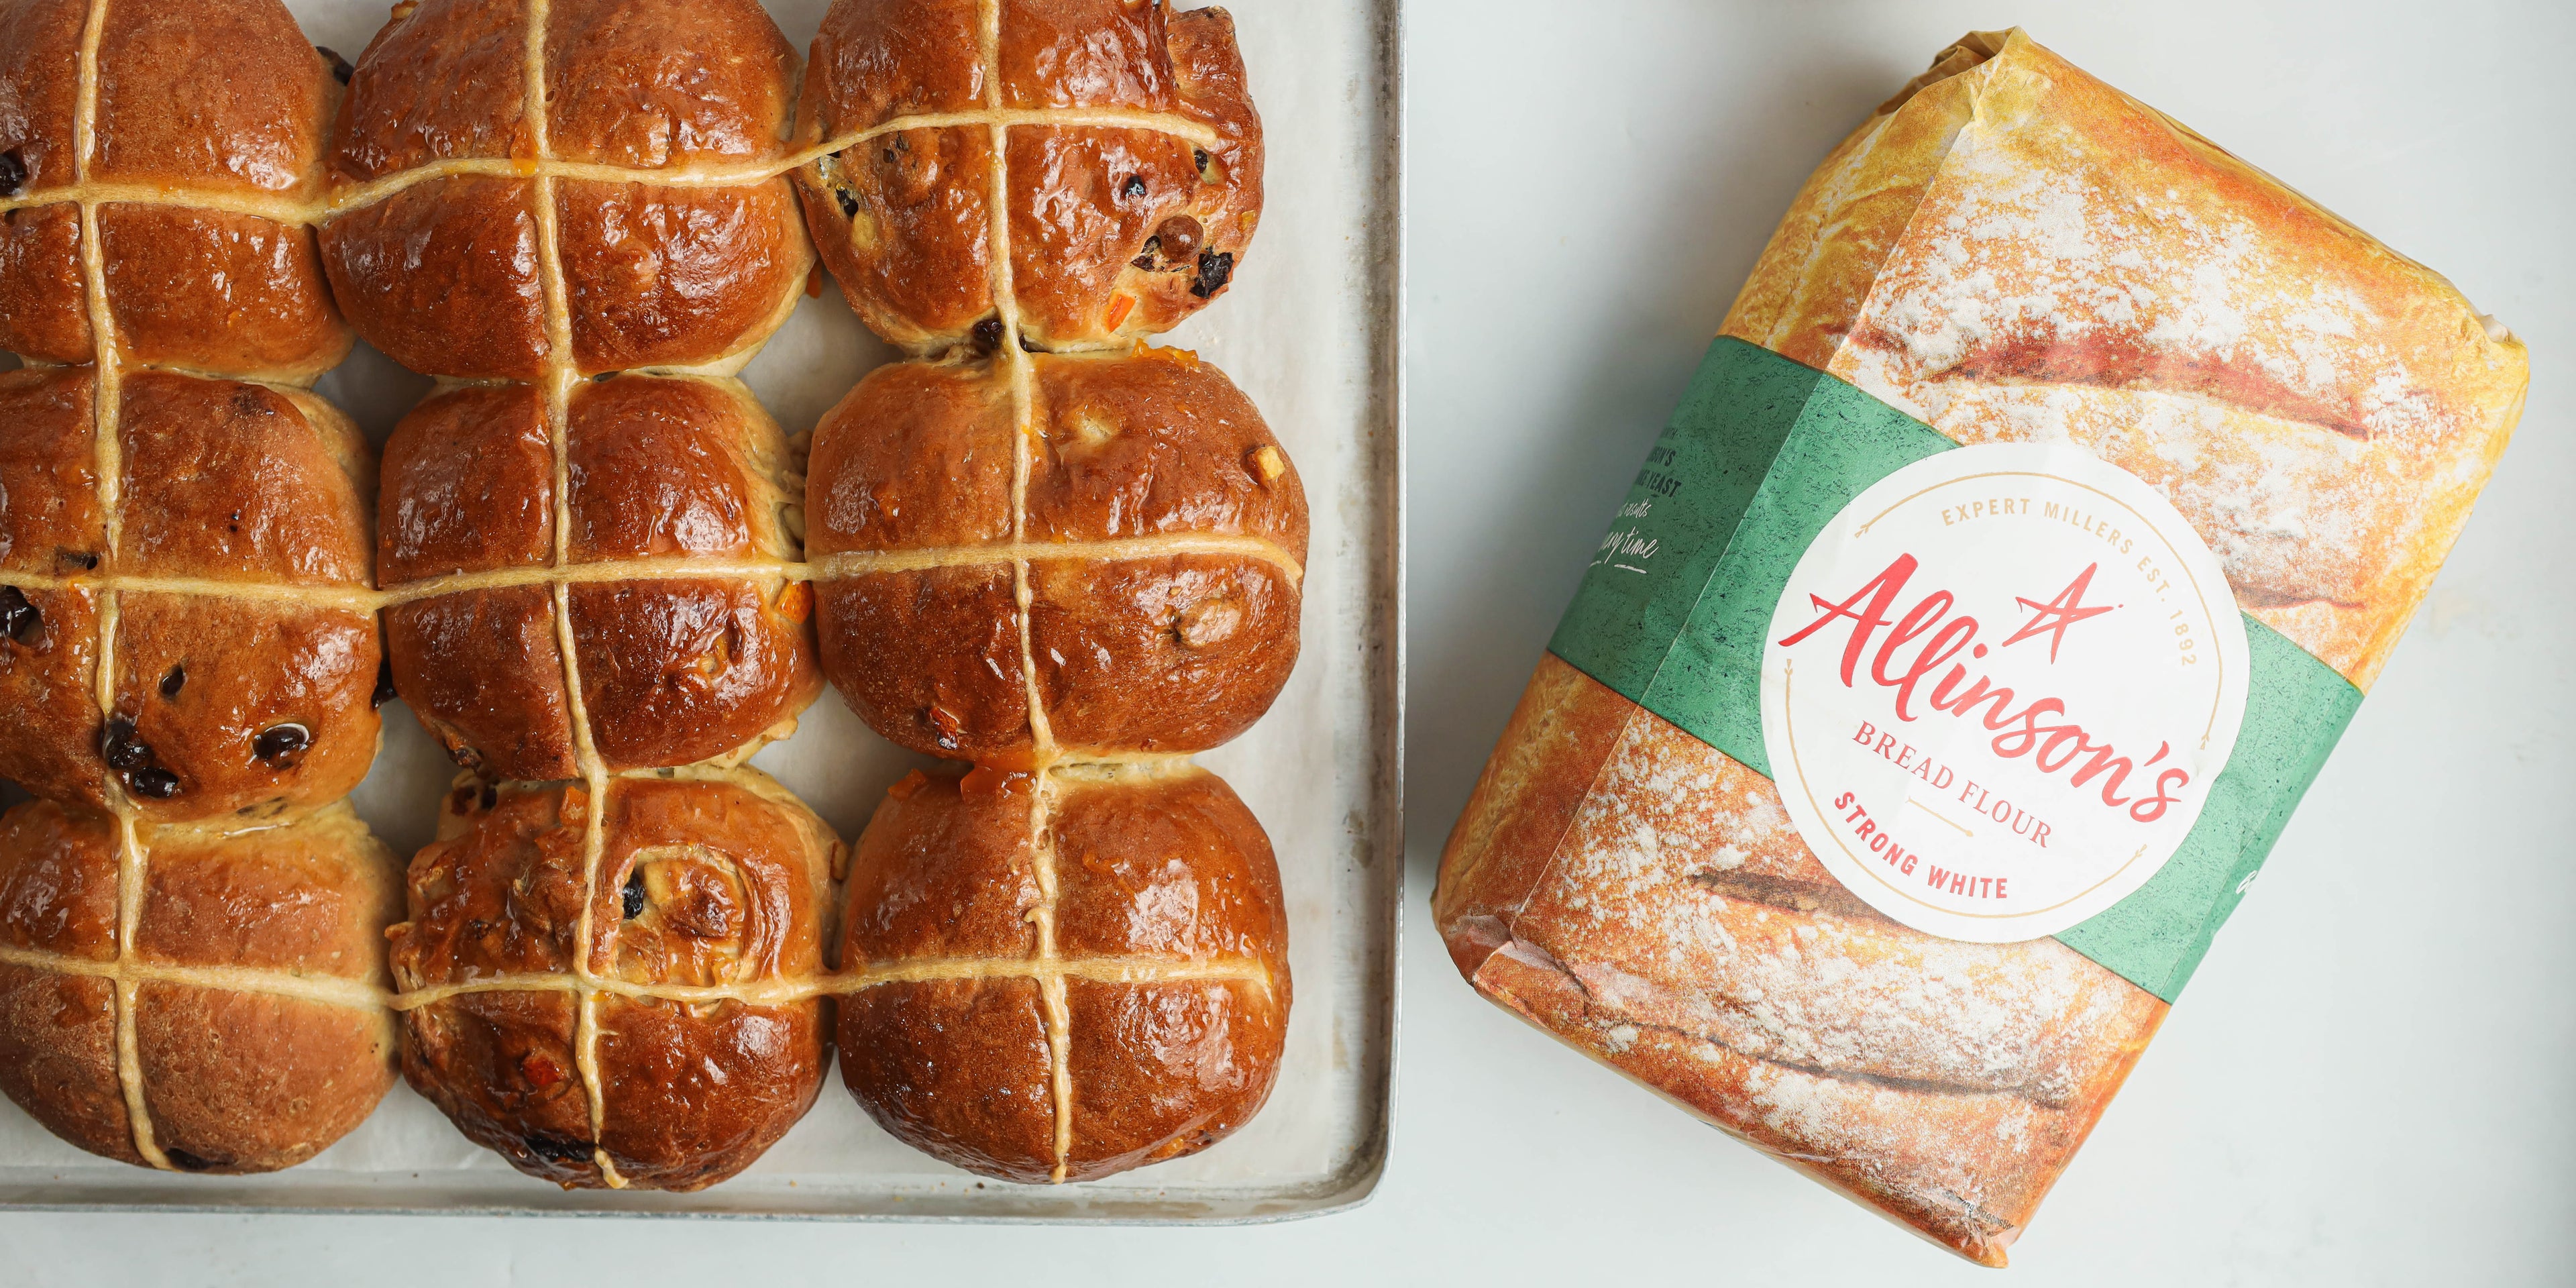 Top view of a fresh batch of Vegan Hot Cross Buns next to a bag of Allinson's Strong White flour